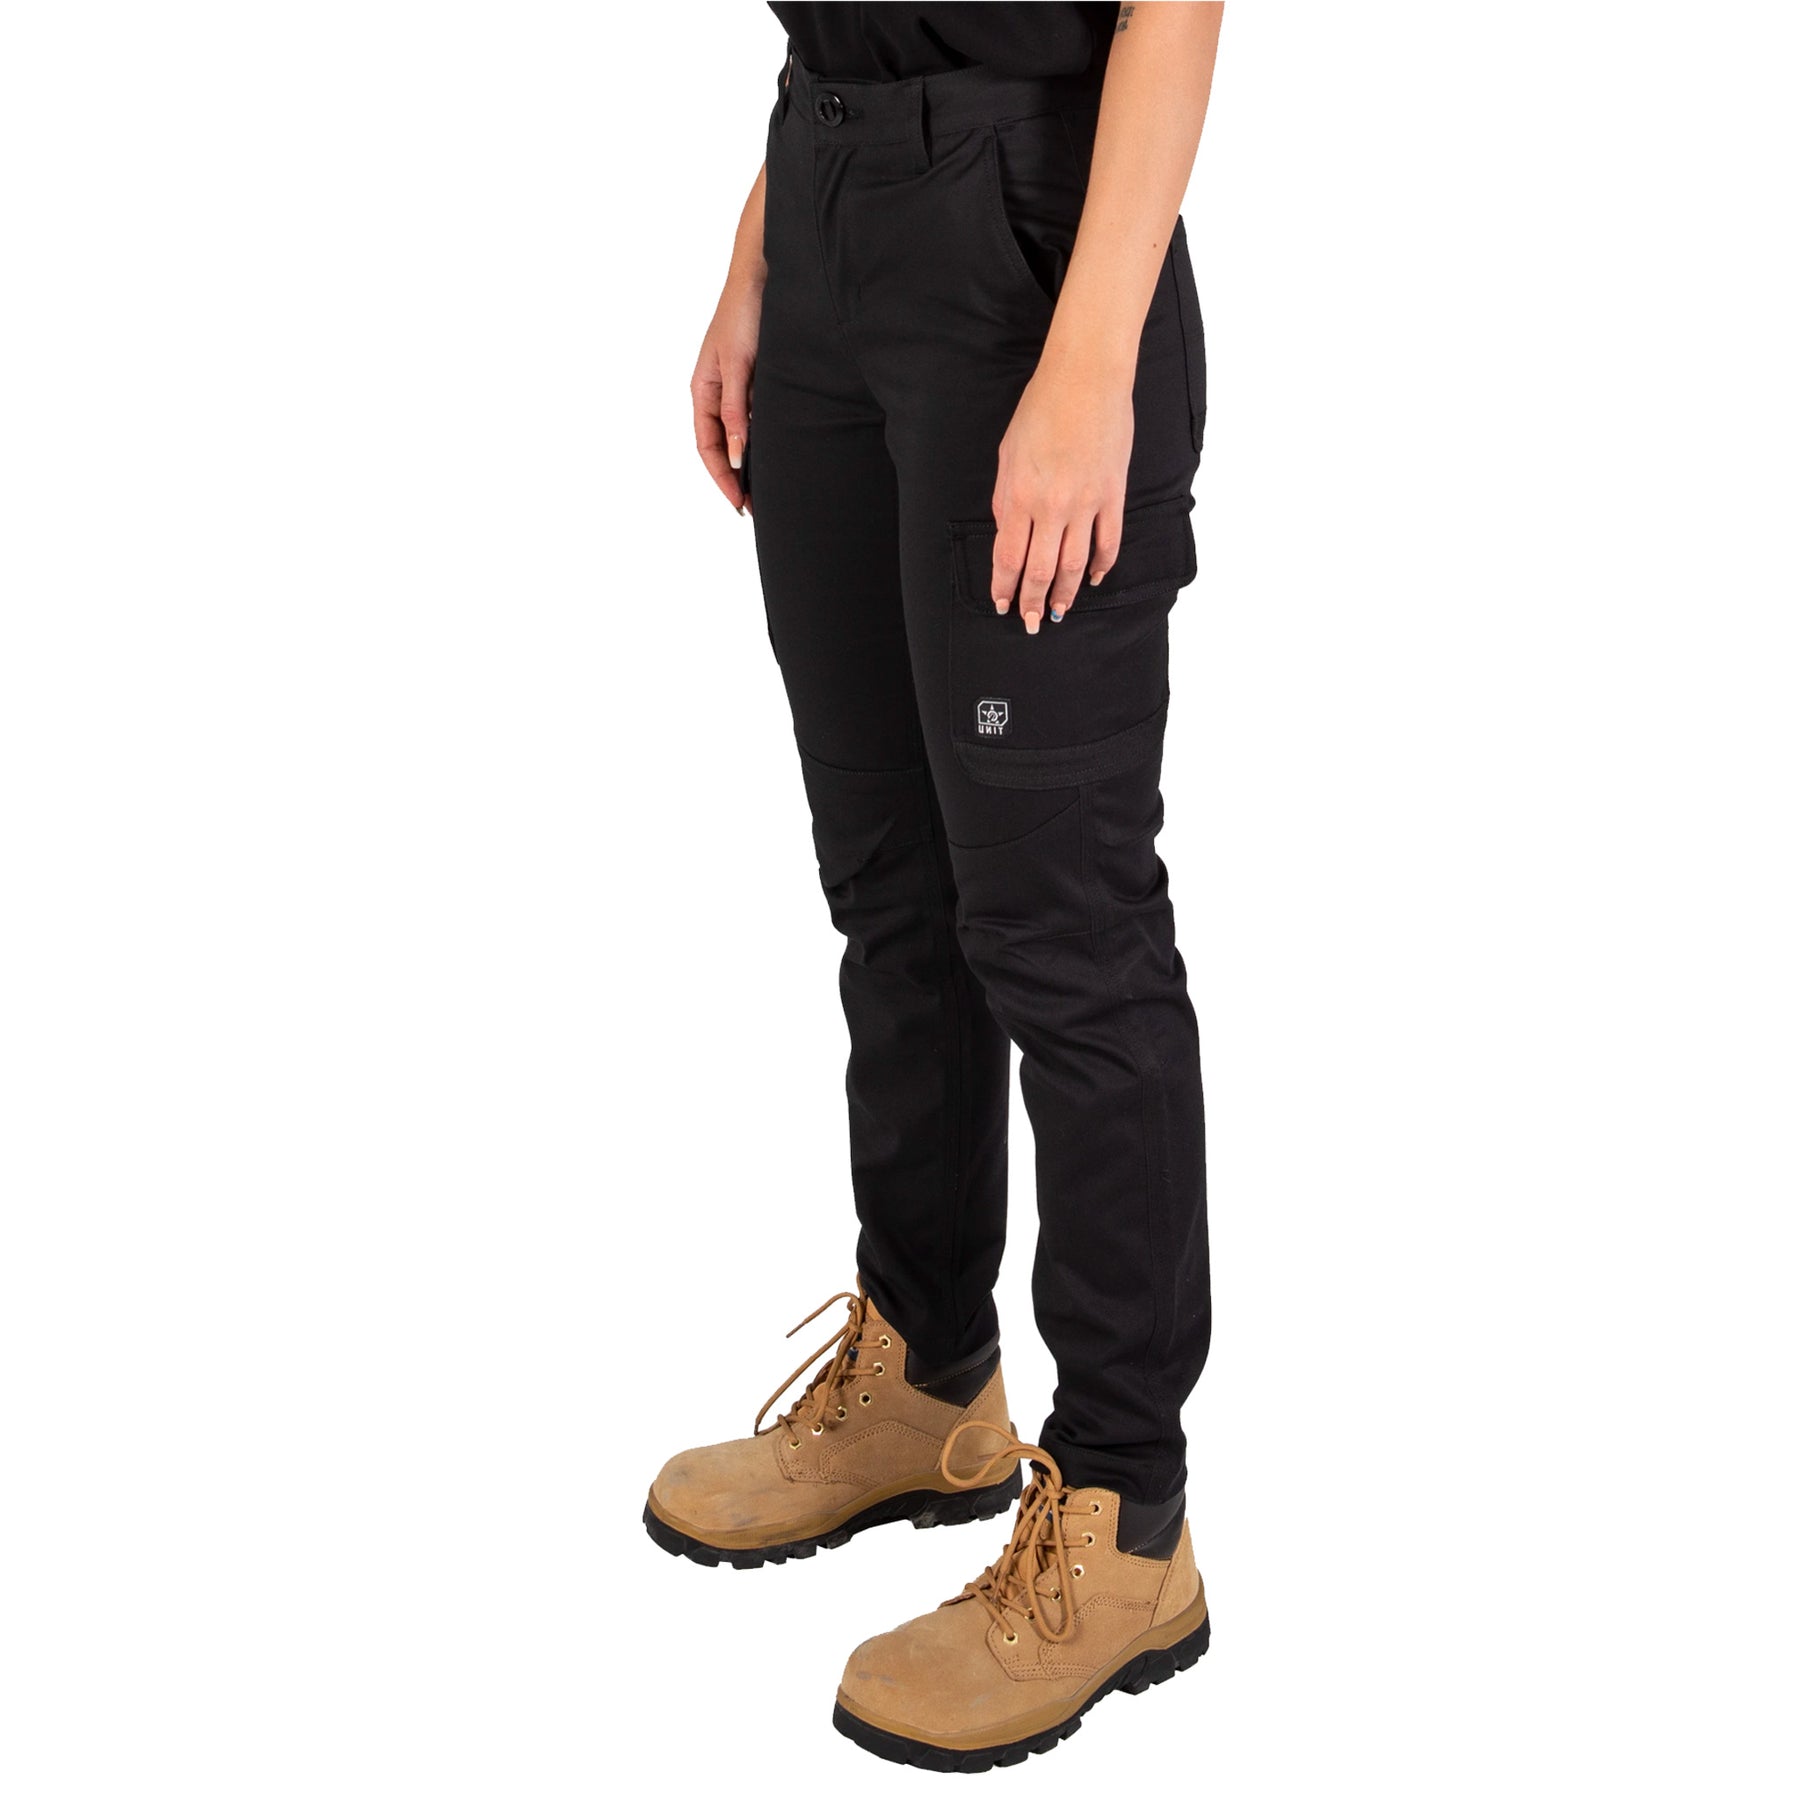 Site King UK Safety Work Wear  The Site King Womens cargo trousers have  been revamped  designed to feature a comfortable elasticated waist This  allows for freedom of movement  flexible